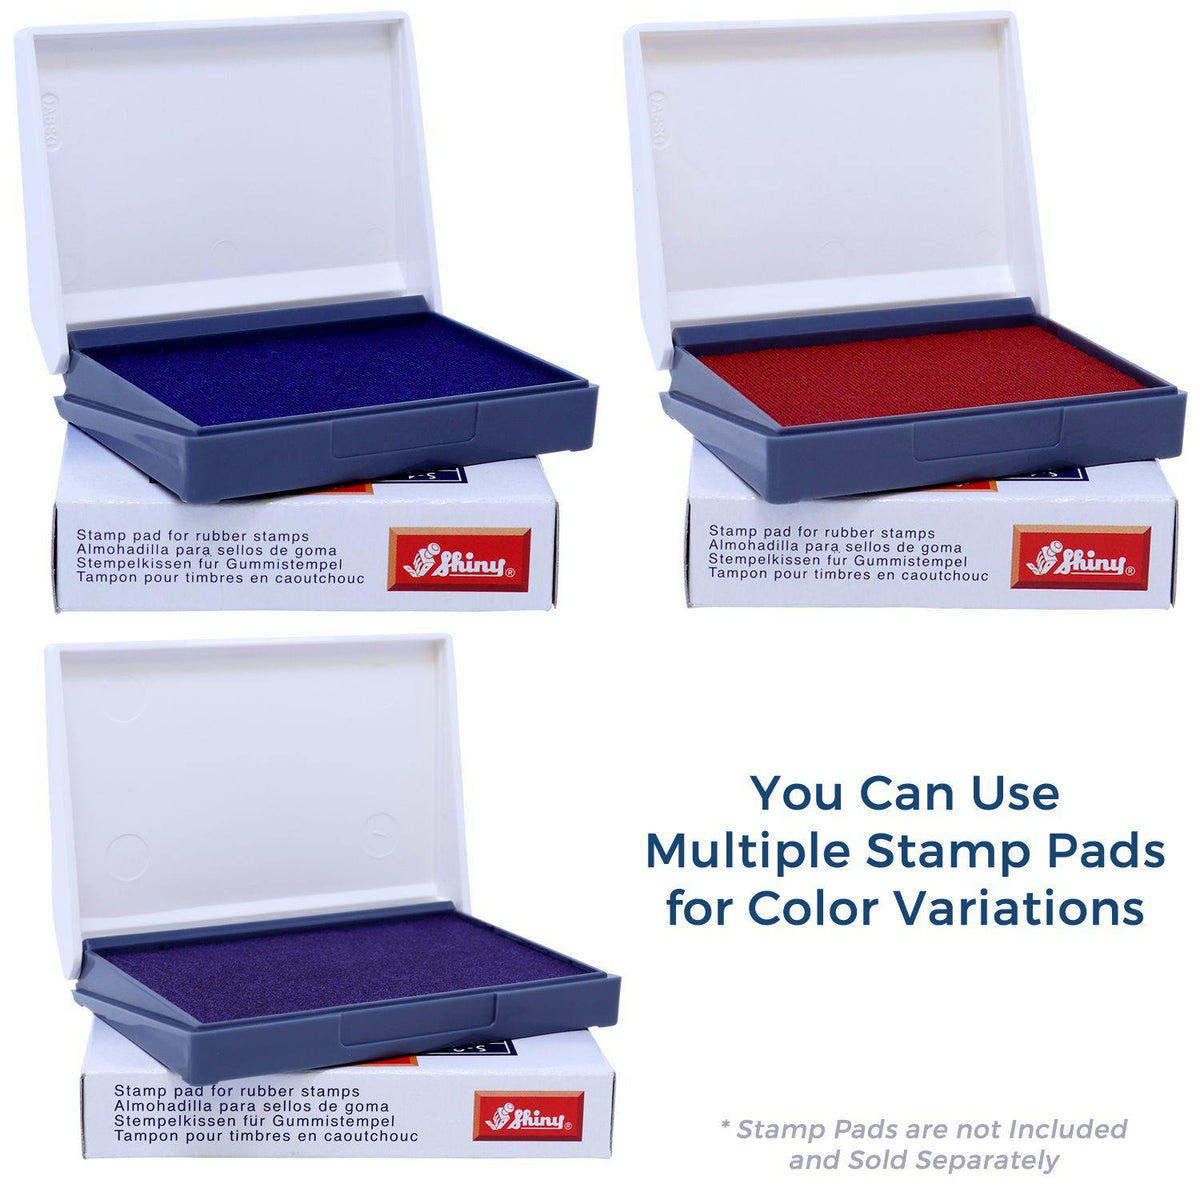 Stamp Pads for Large Banco Rubber Stamp Available